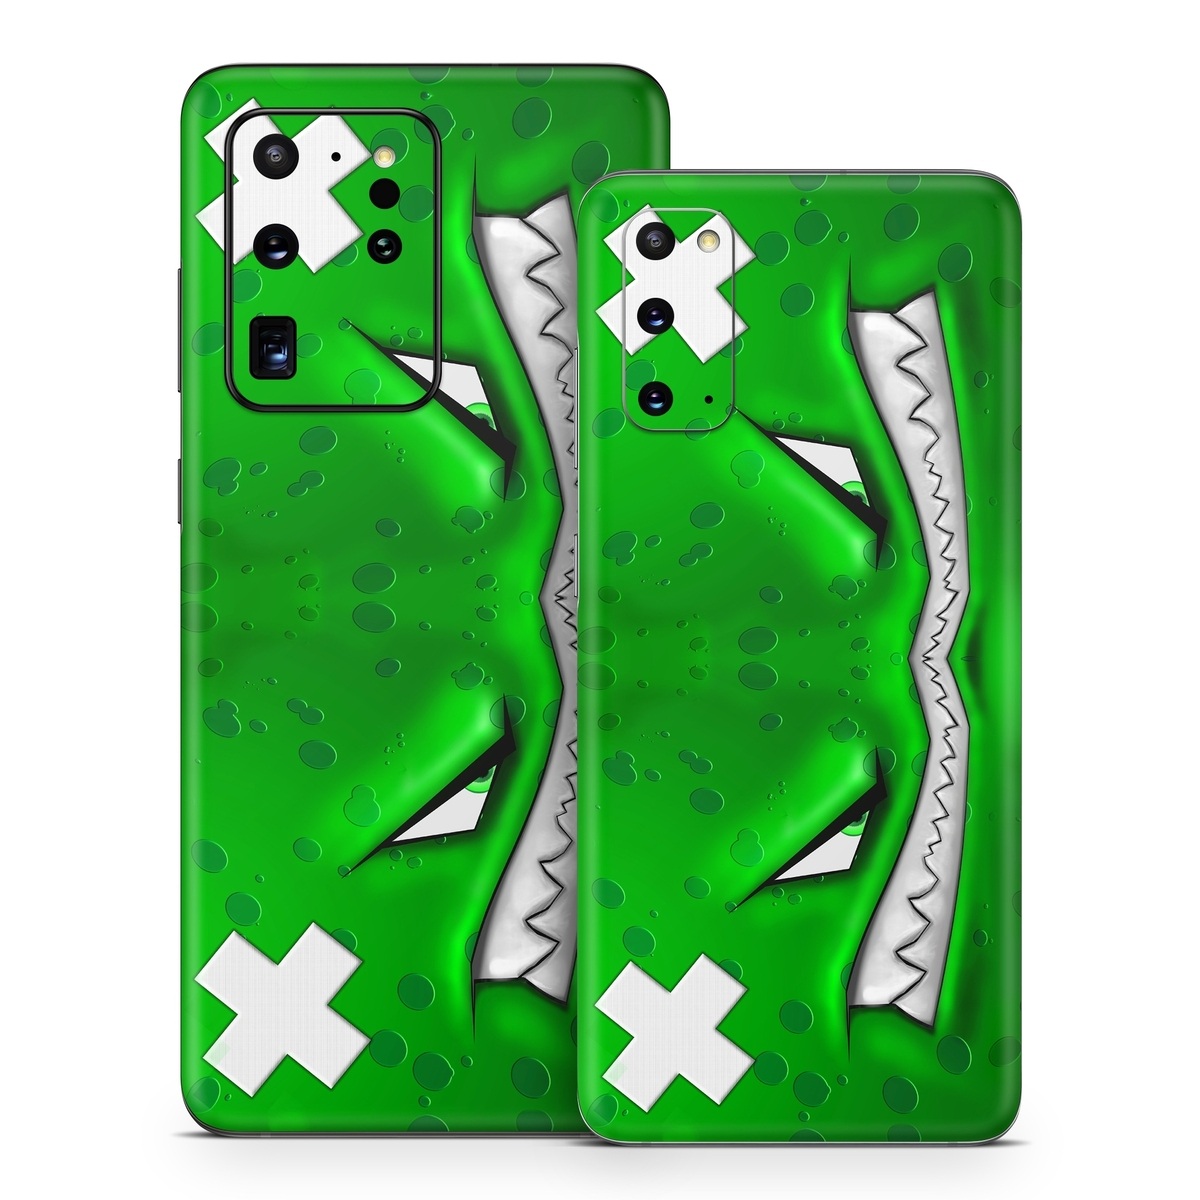 Samsung Galaxy S20 Series Skin design of Green, Font, Animation, Logo, Graphics, Games, with green, white colors